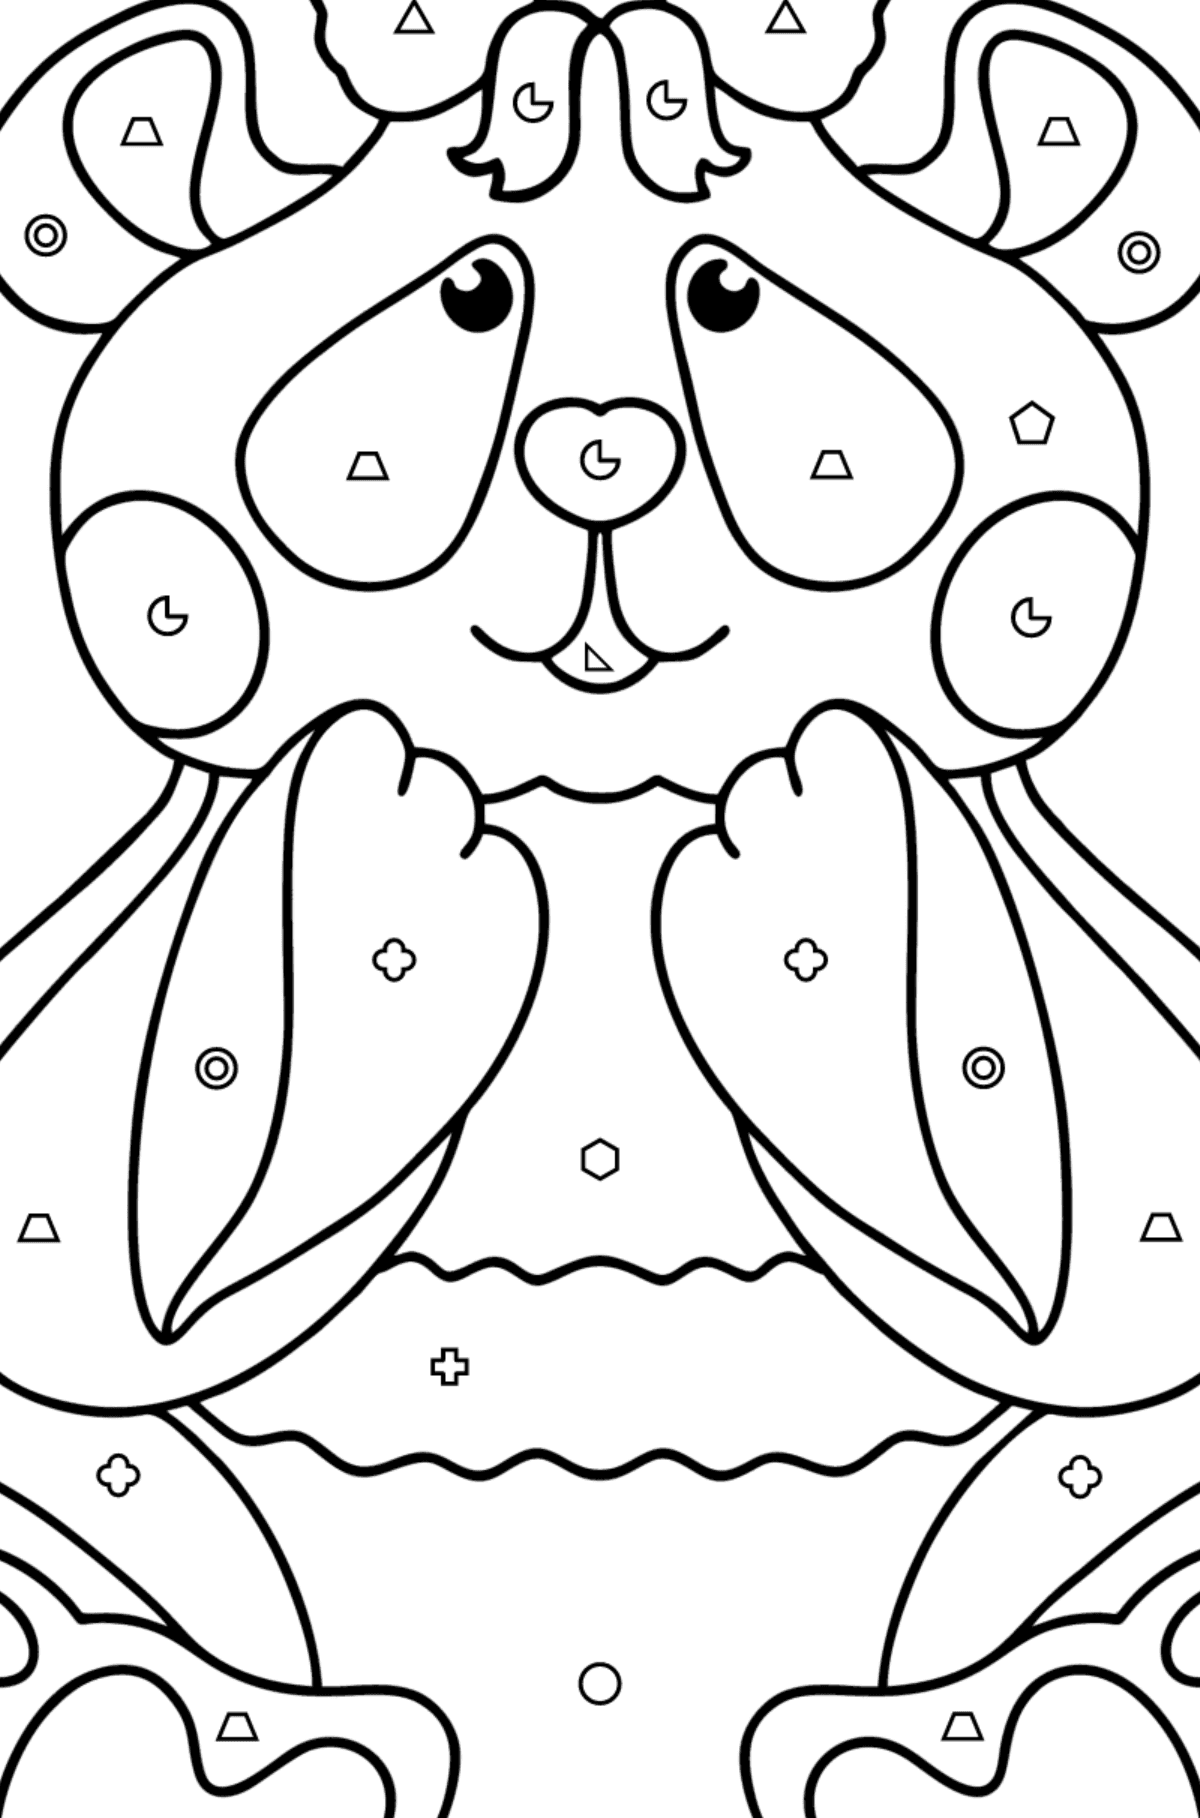 Panda baby coloring page - Coloring by Geometric Shapes for Kids